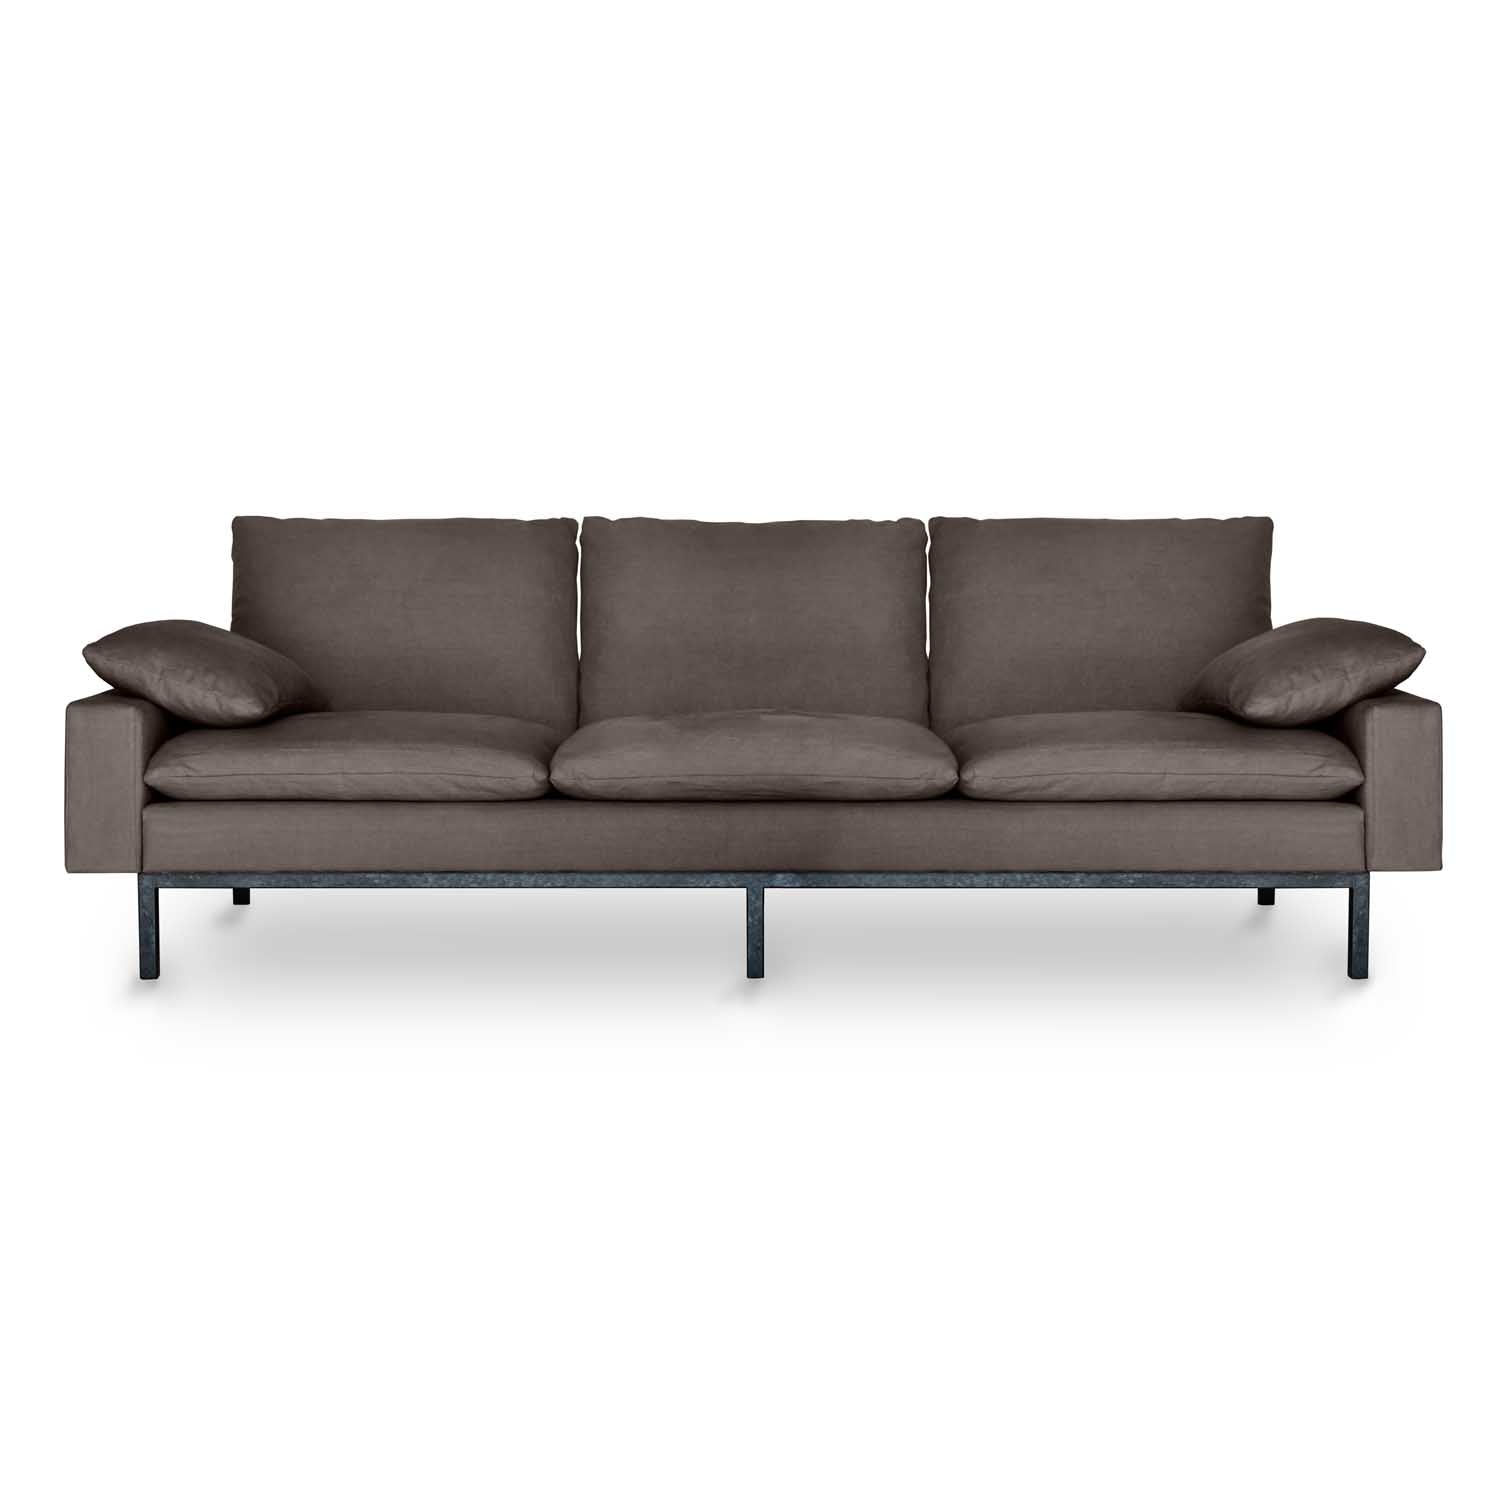 Elegant Addition to Any Living Environment. grey cotton sofa sustainable.